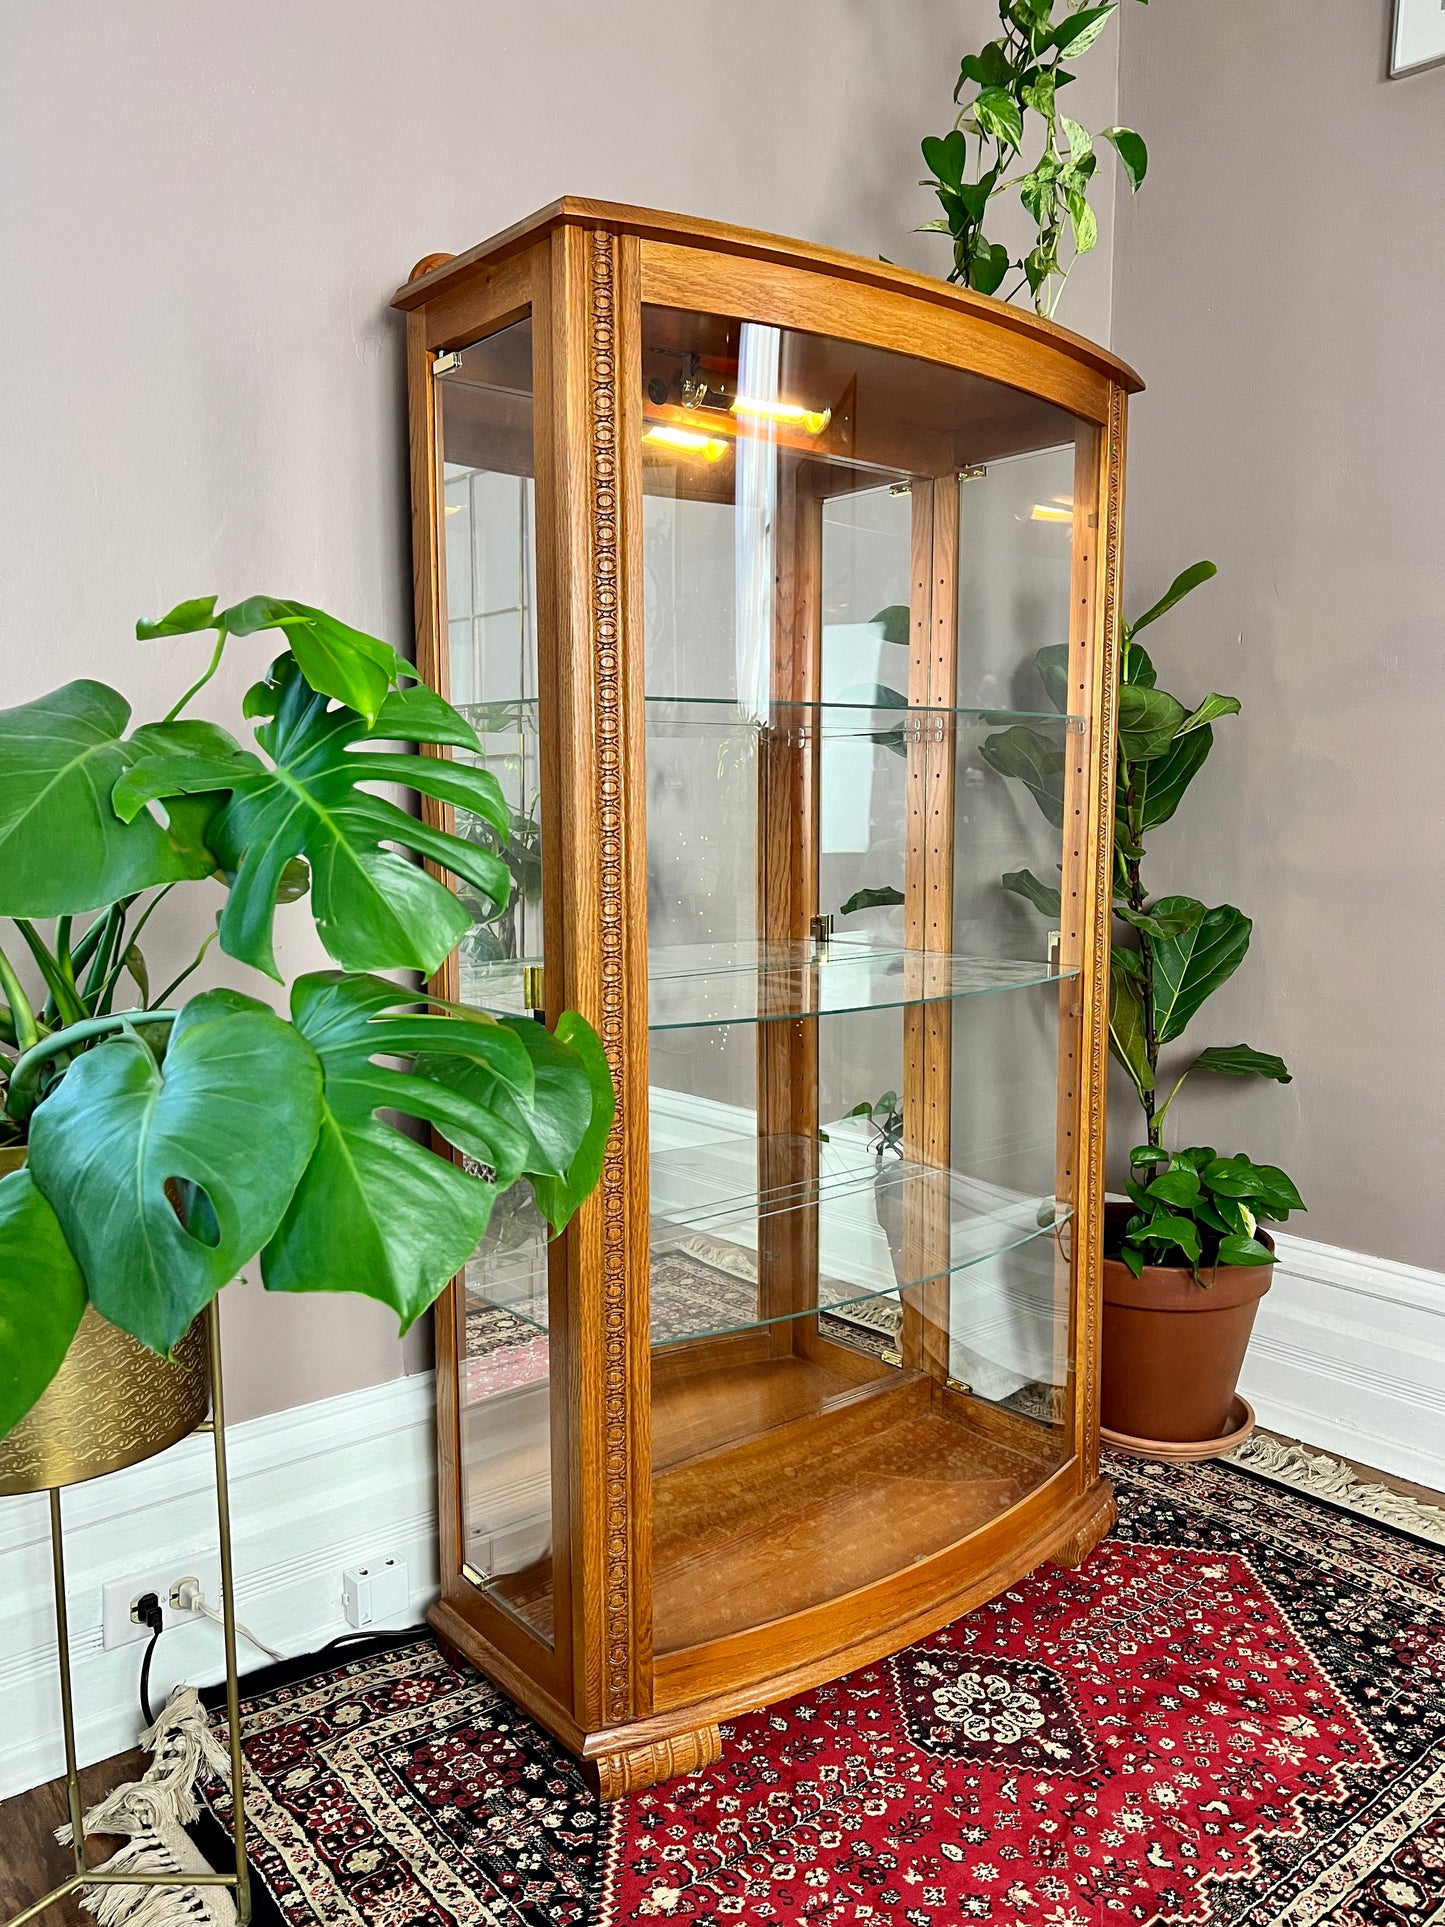 The Tussock Display Cabinet